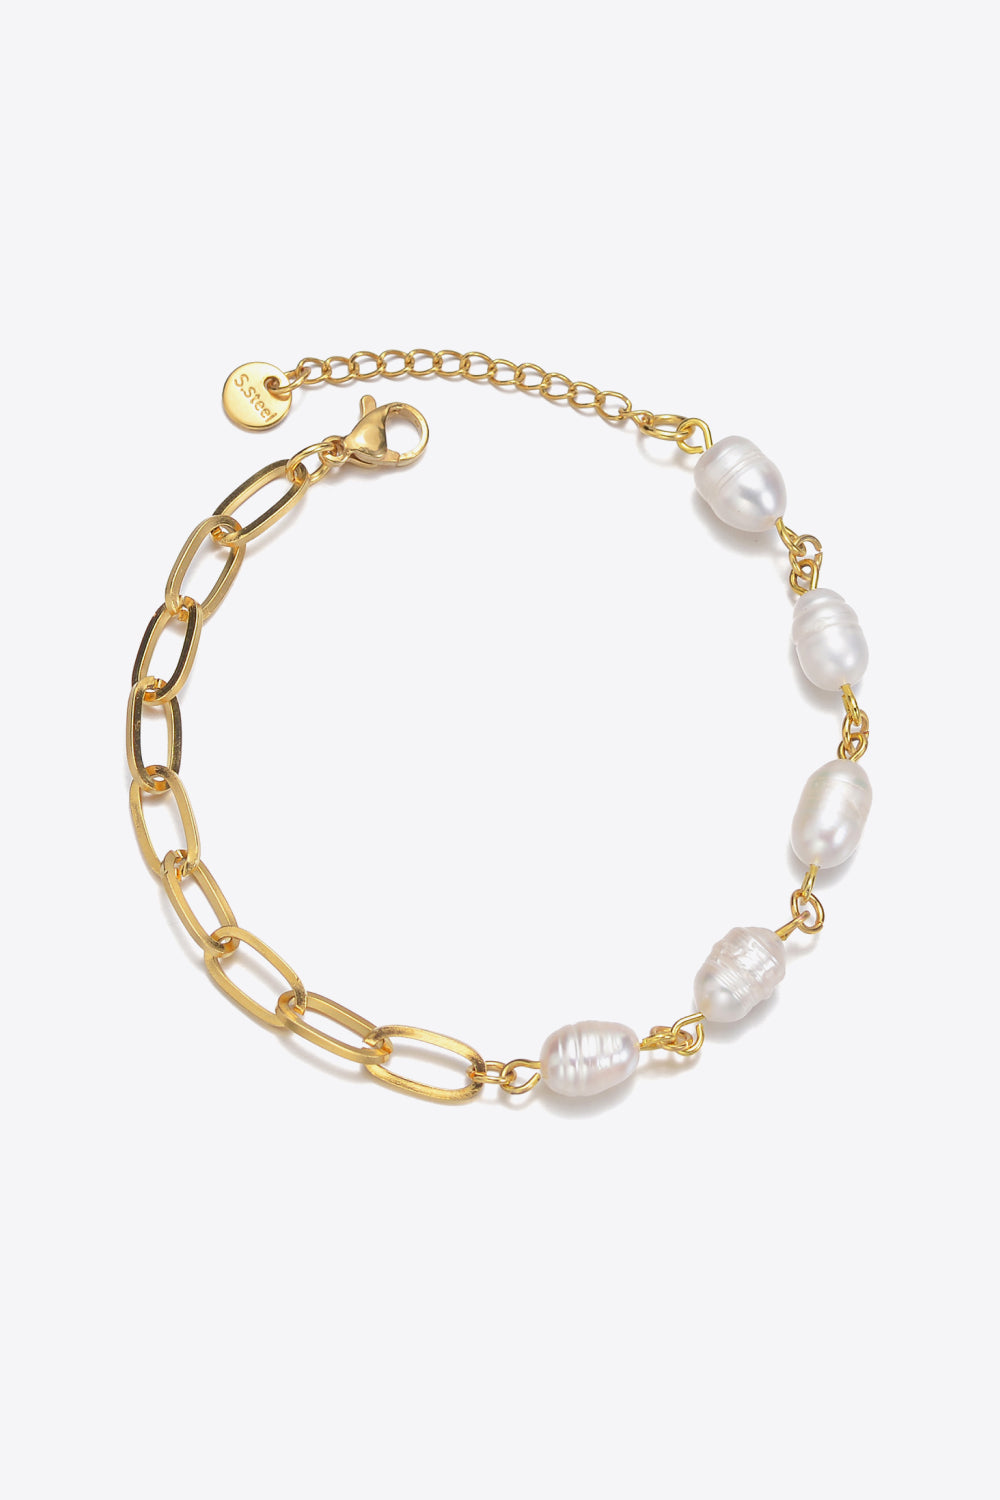 Half Pearl Half Chain Stainless Steel Bracelet - Gold / One Size - T-Shirts - Bracelets - 1 - 2024